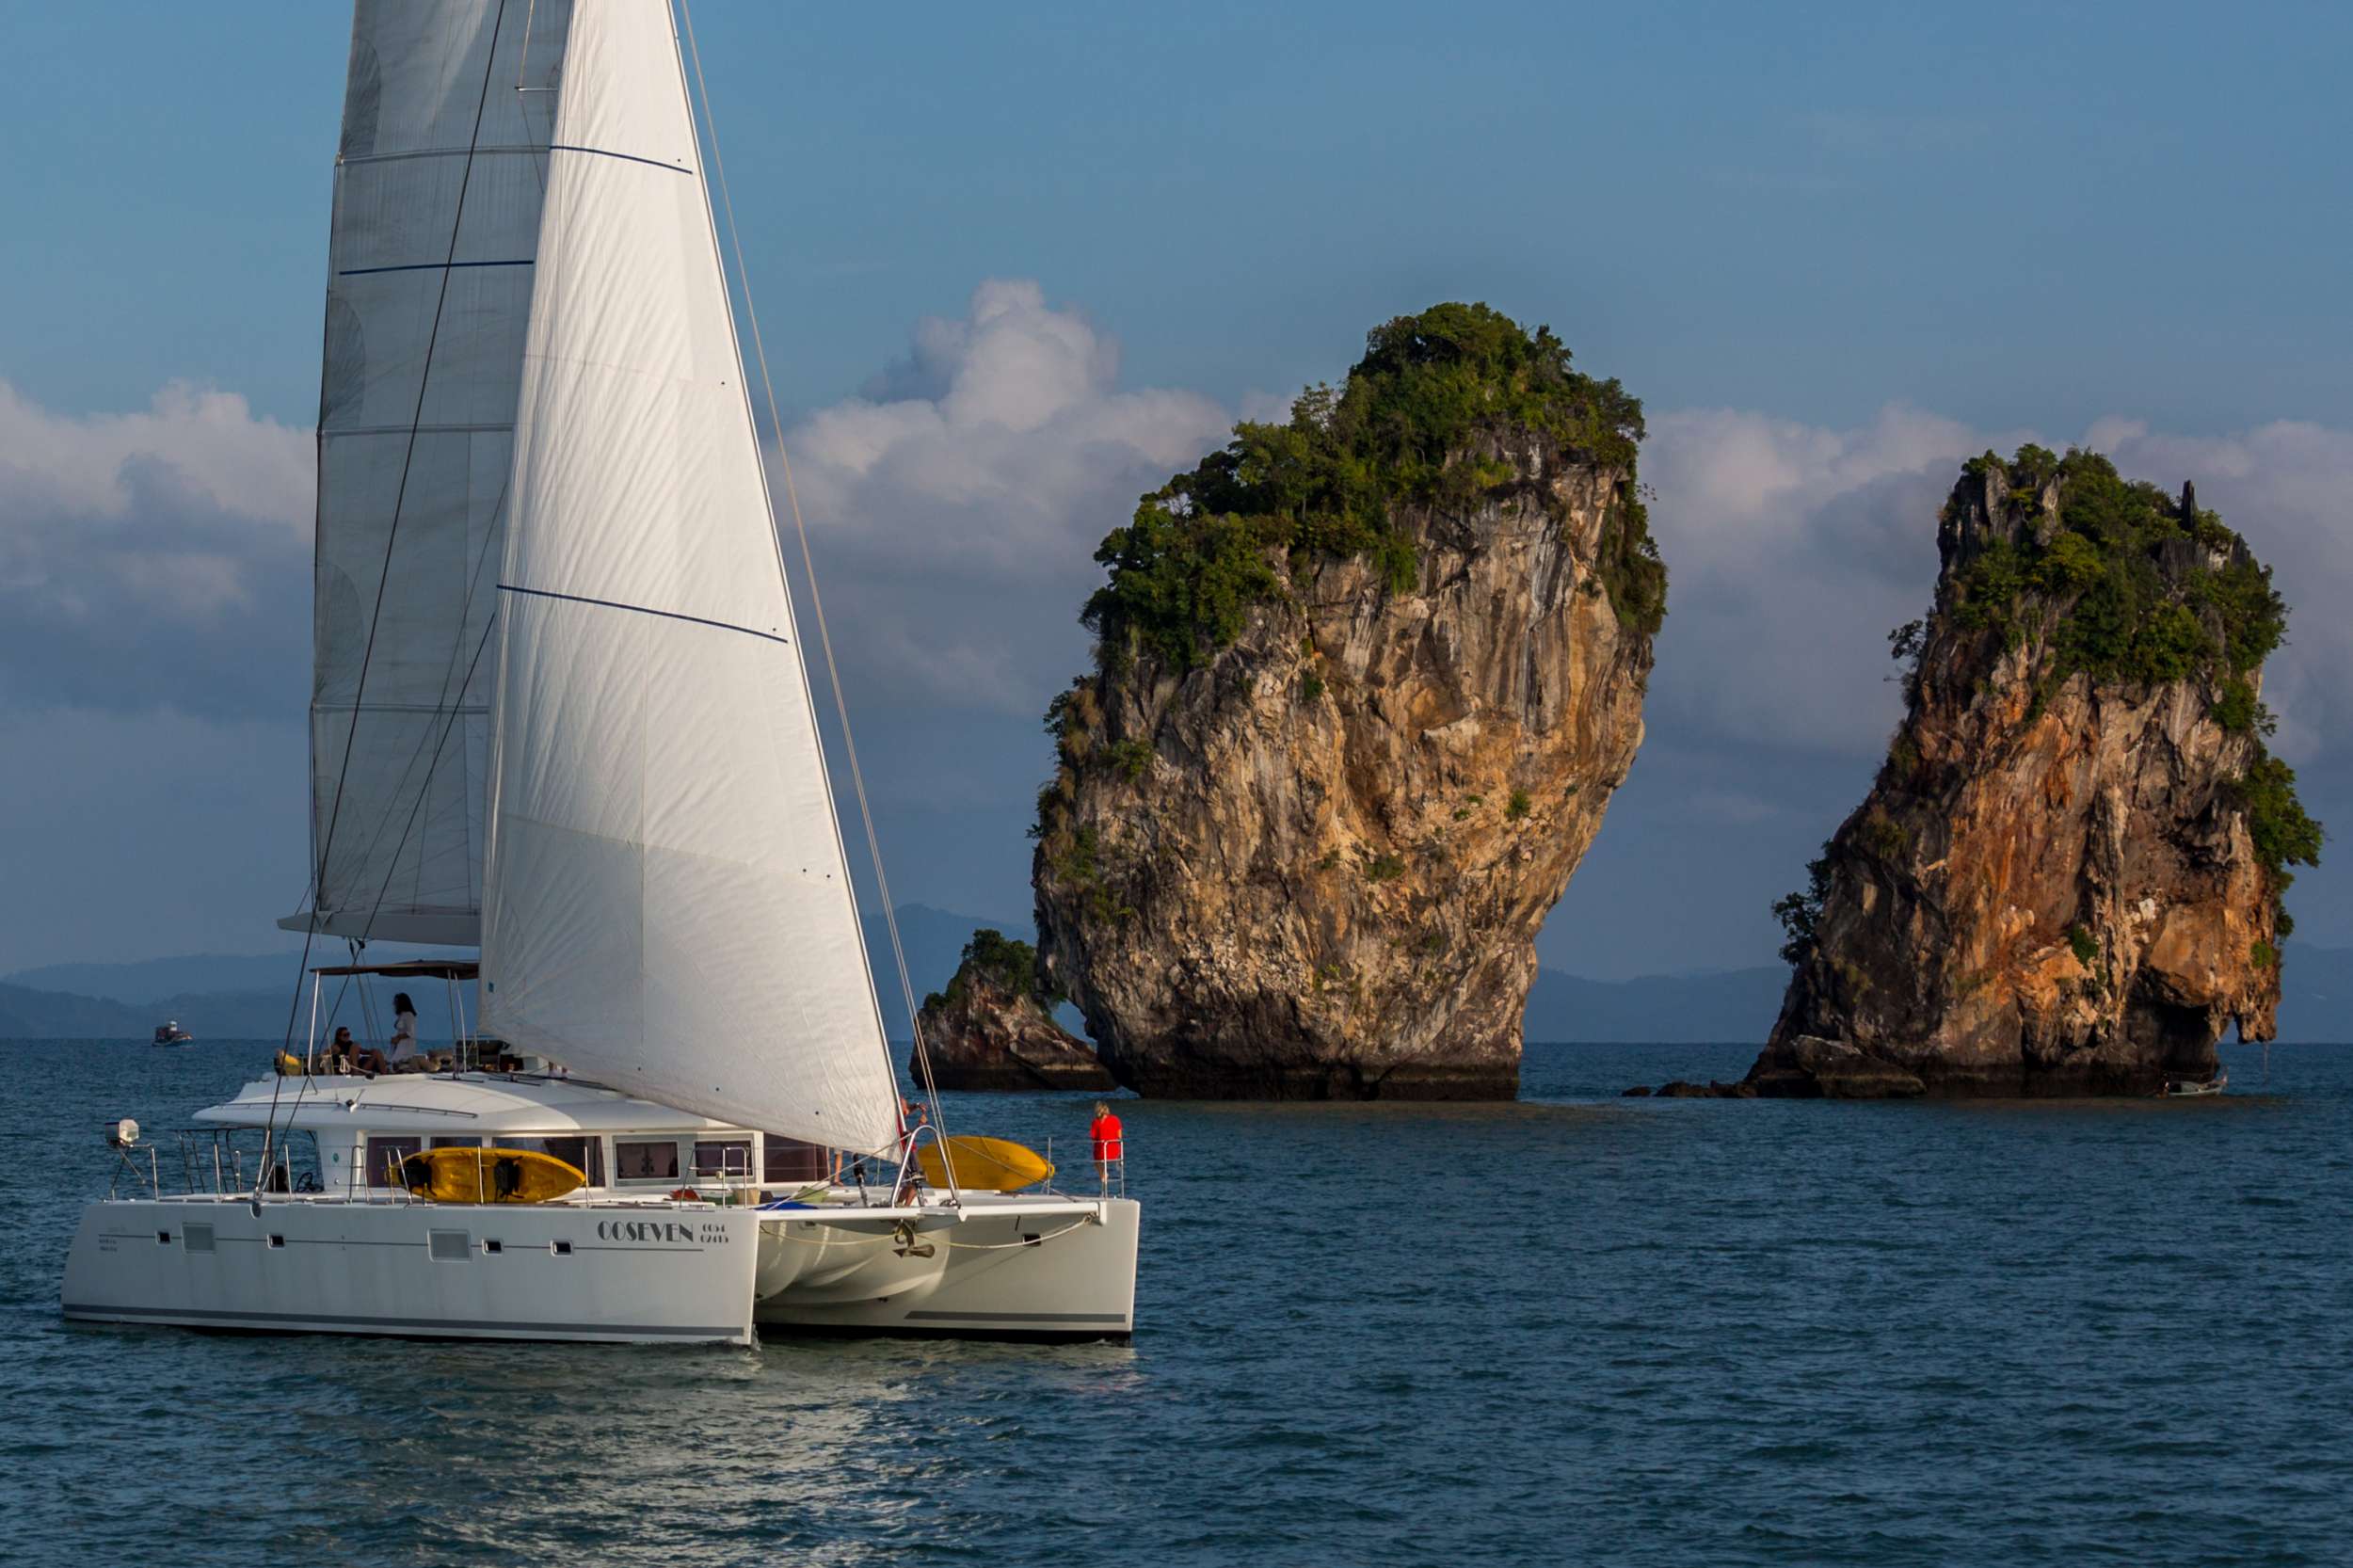 00SEVEN - Yacht Charter Philippines & Boat hire in SE Asia 1